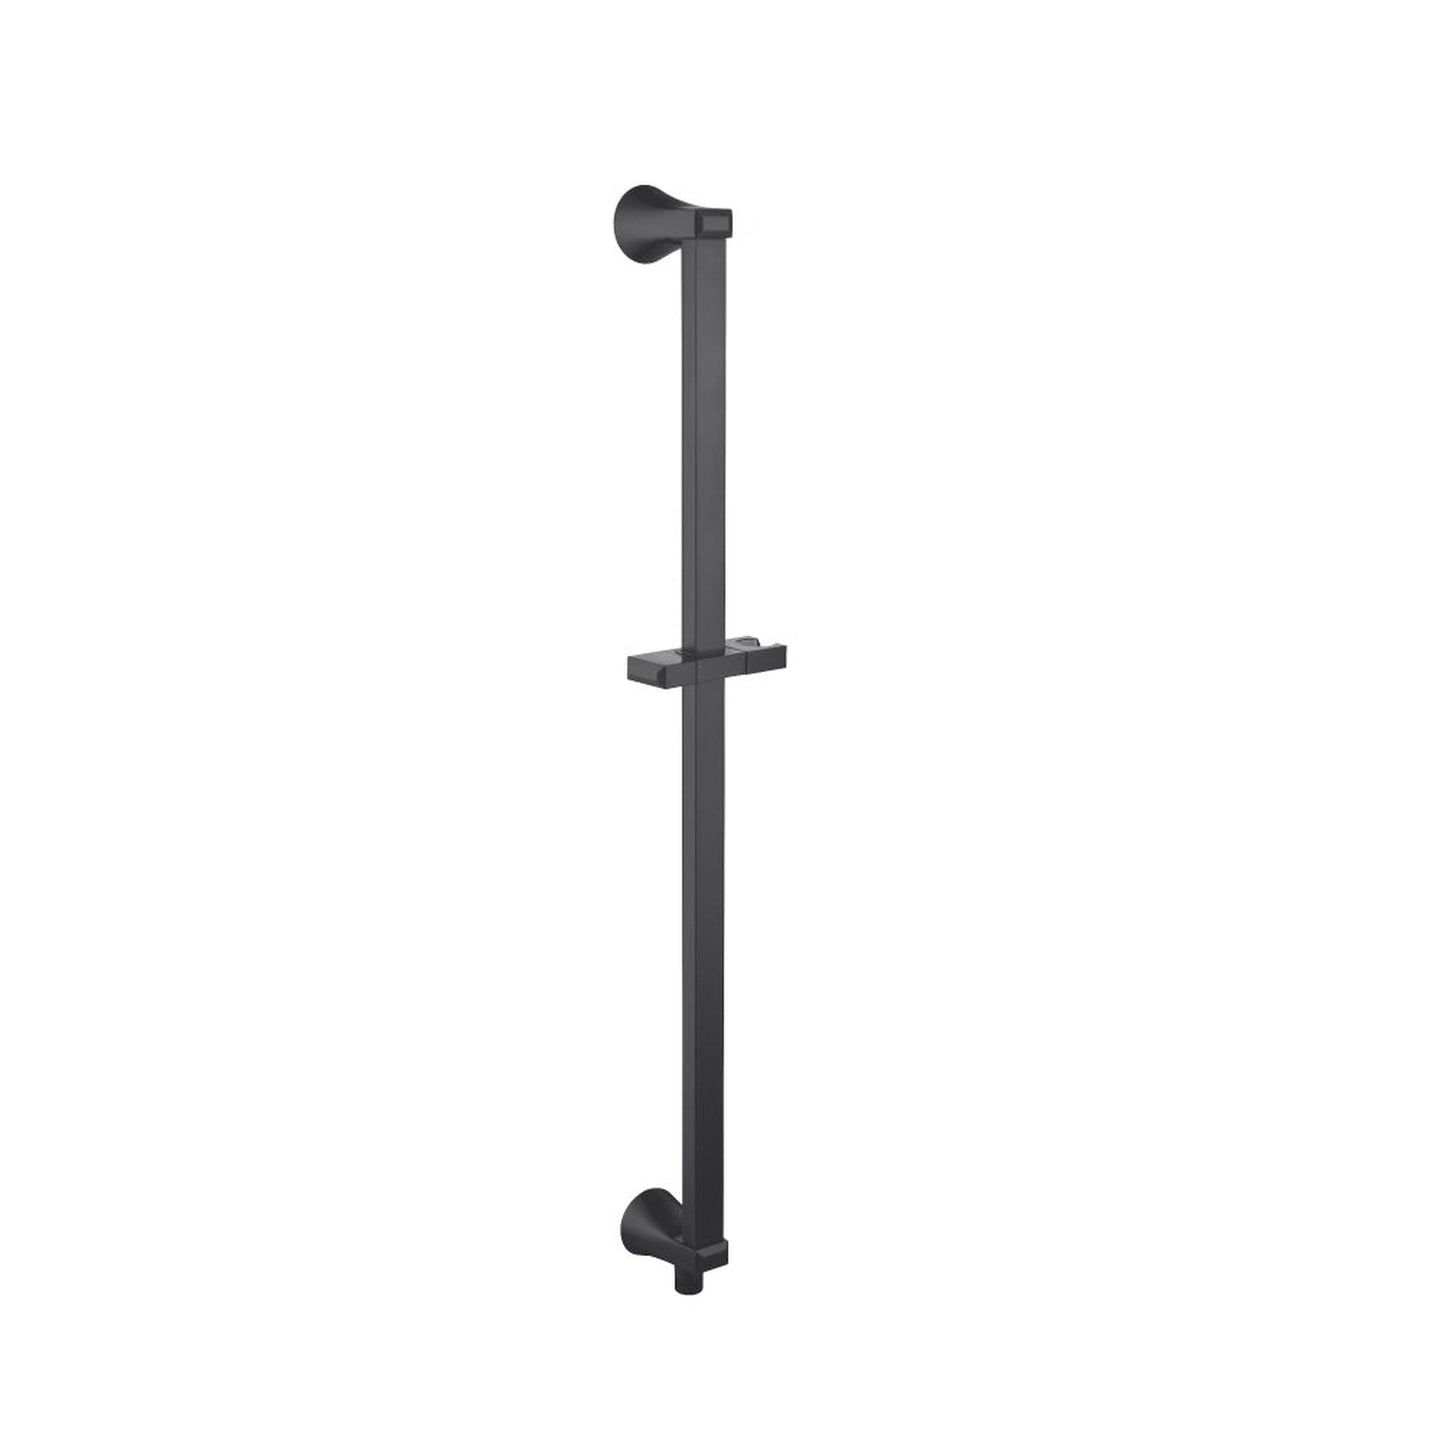 Isenberg Serie 230 Shower Slide Bar With Integrated Wall Elbow in Matte Black